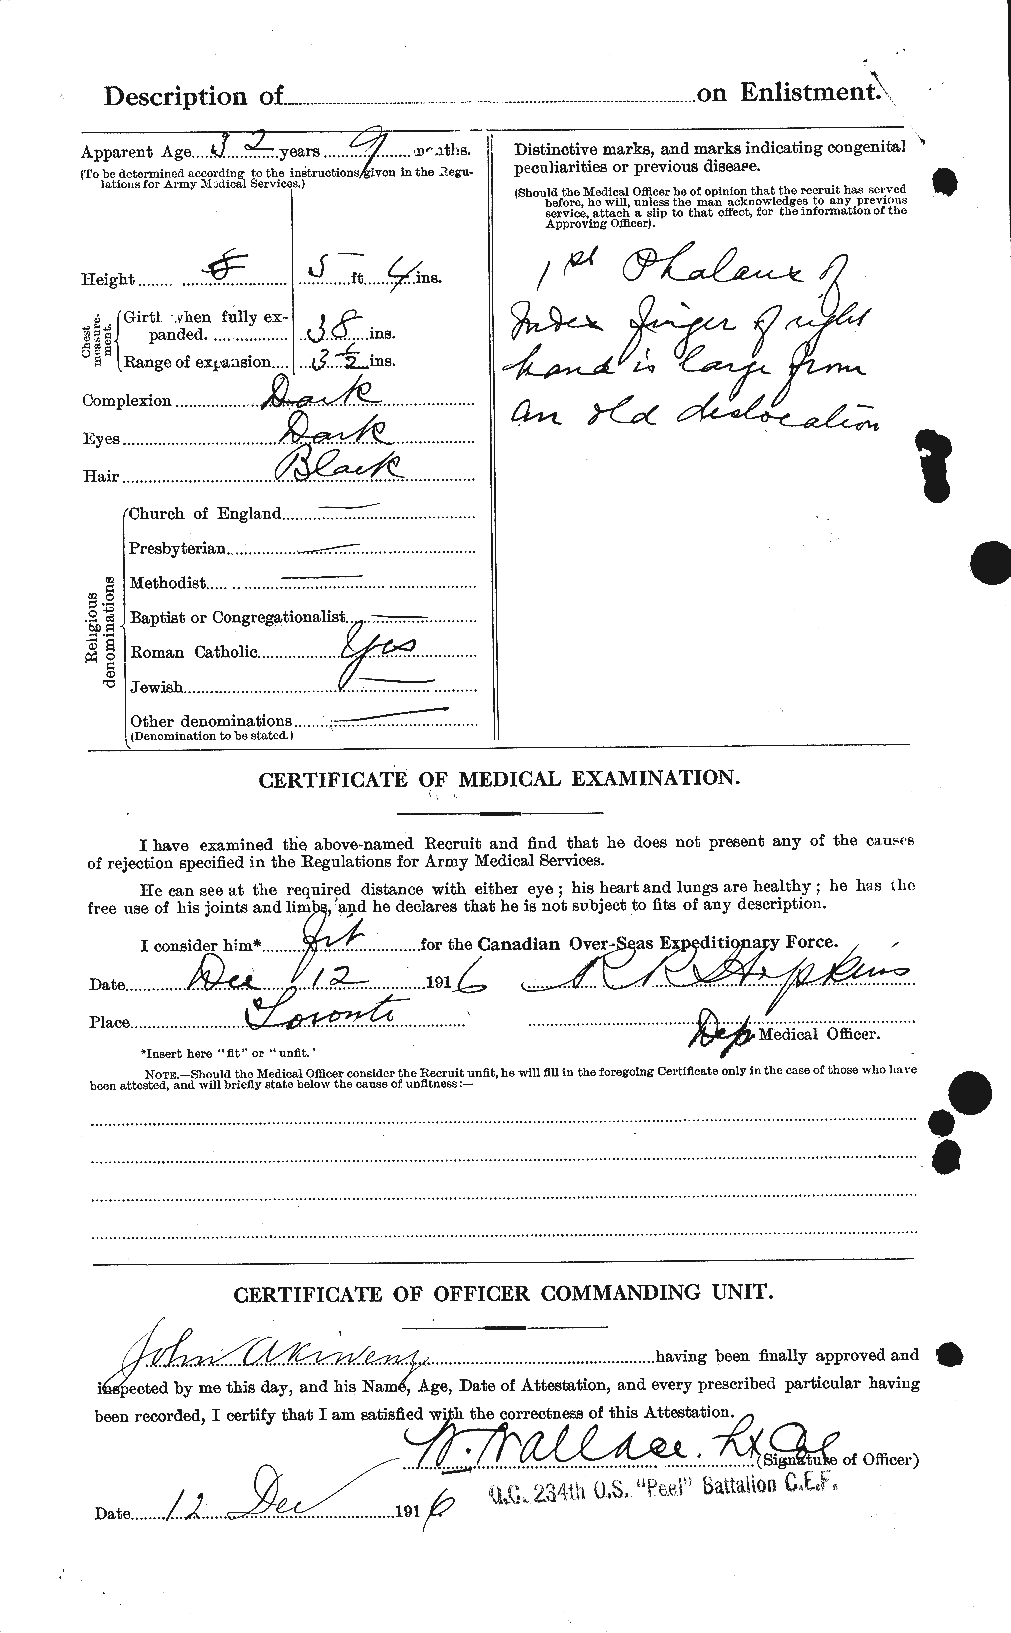 Personnel Records of the First World War - CEF 203591b